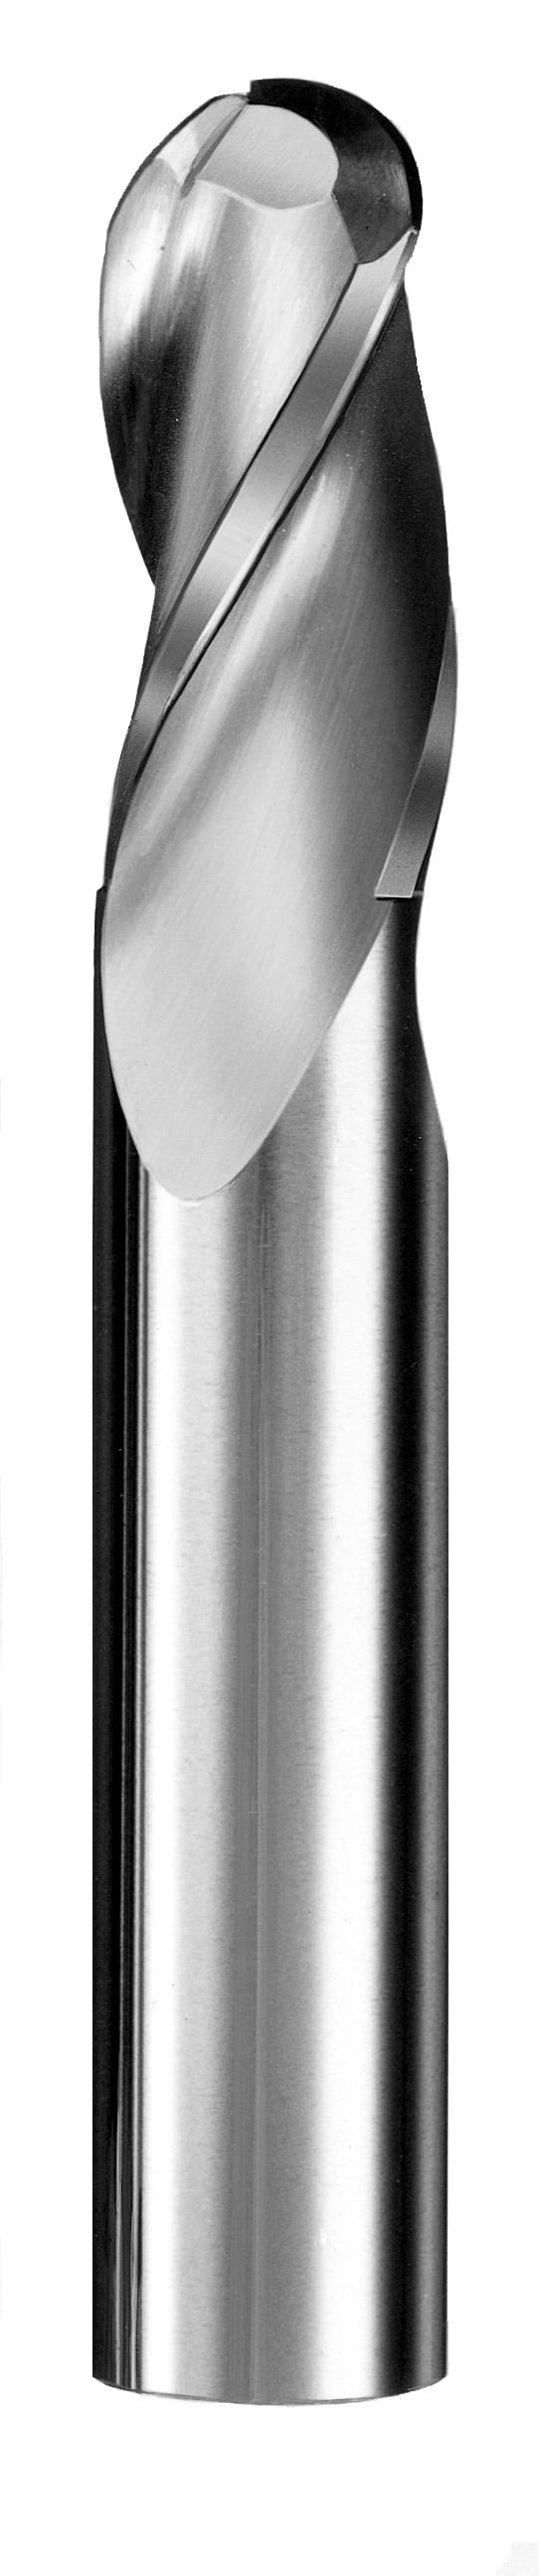 25/64" Dia, 3 Flute, Ball Nose End Mill - 30550